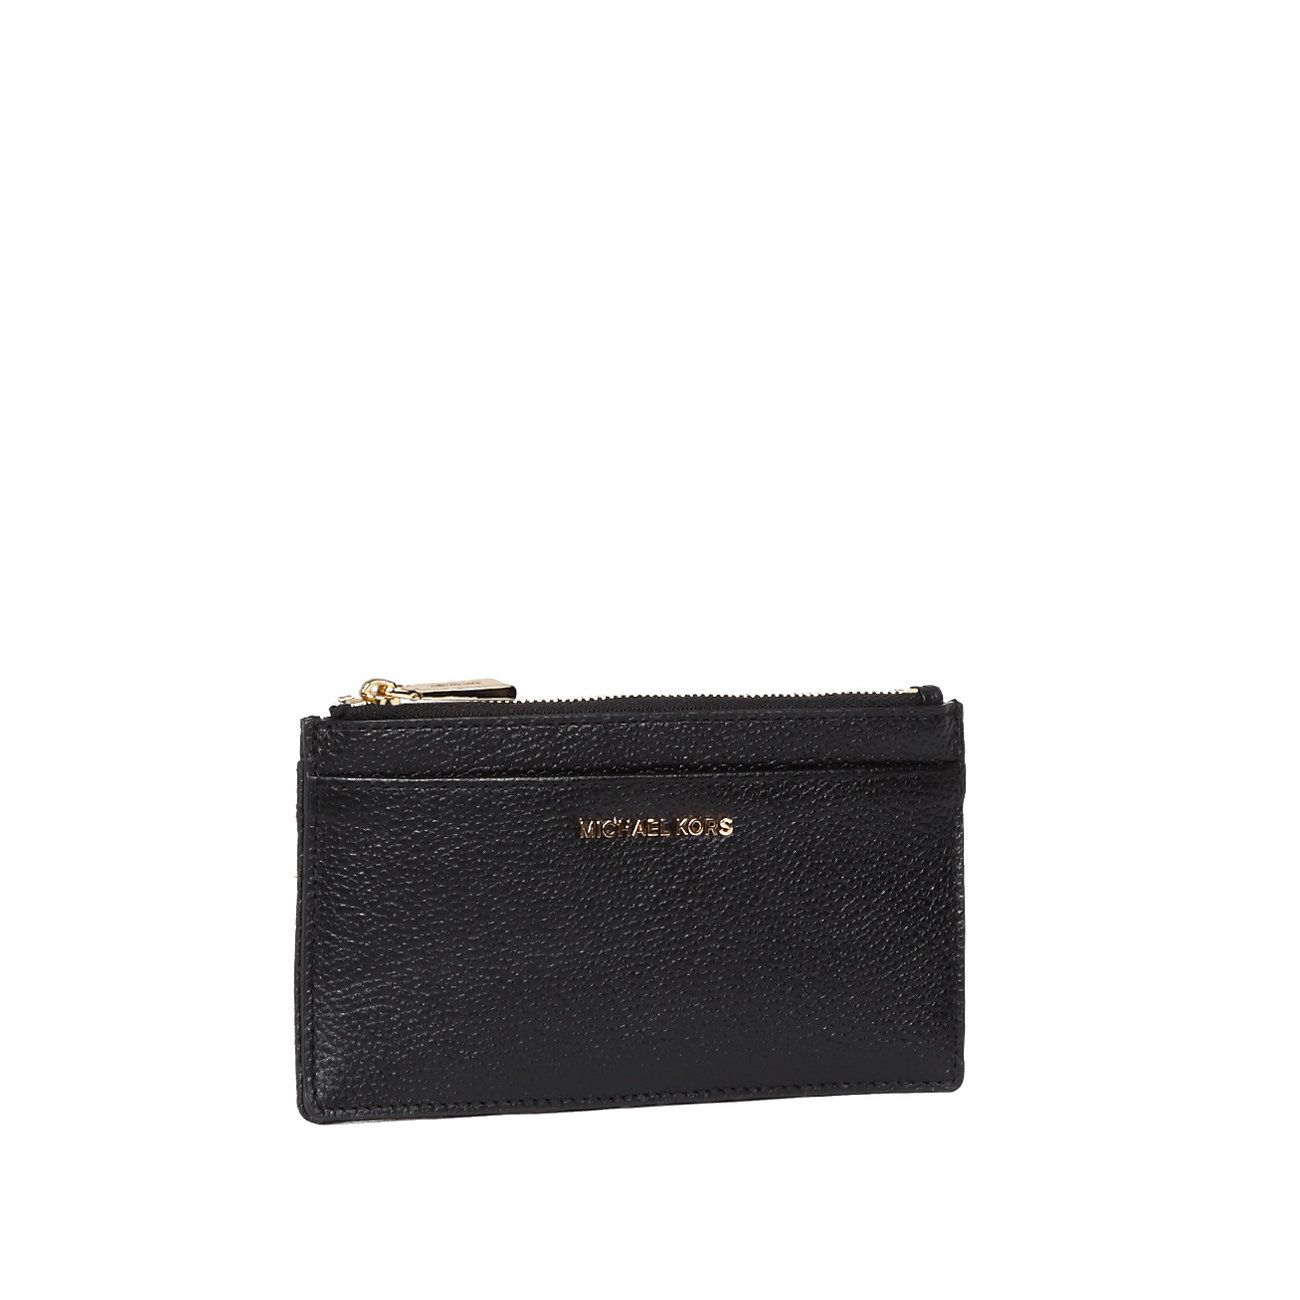 Michael Kors Jet Set Travel Small Top Zip Leather Coin Pouch / Wallet -  Black 